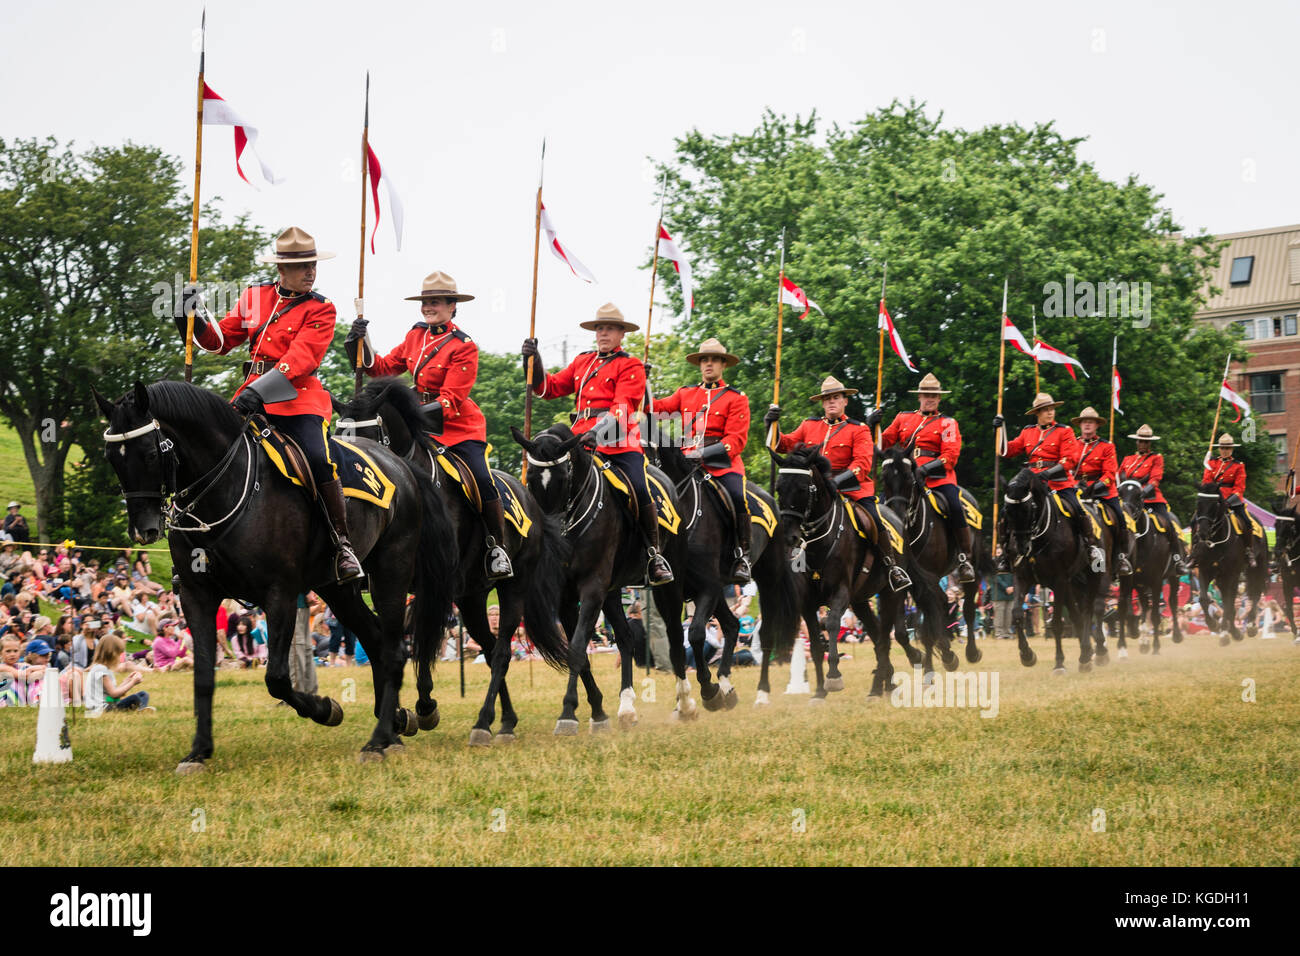 RCMP Musical Ride performance at Wanderer's Grounds in Halifax, Nova Scotia, Canada. Stock Photo